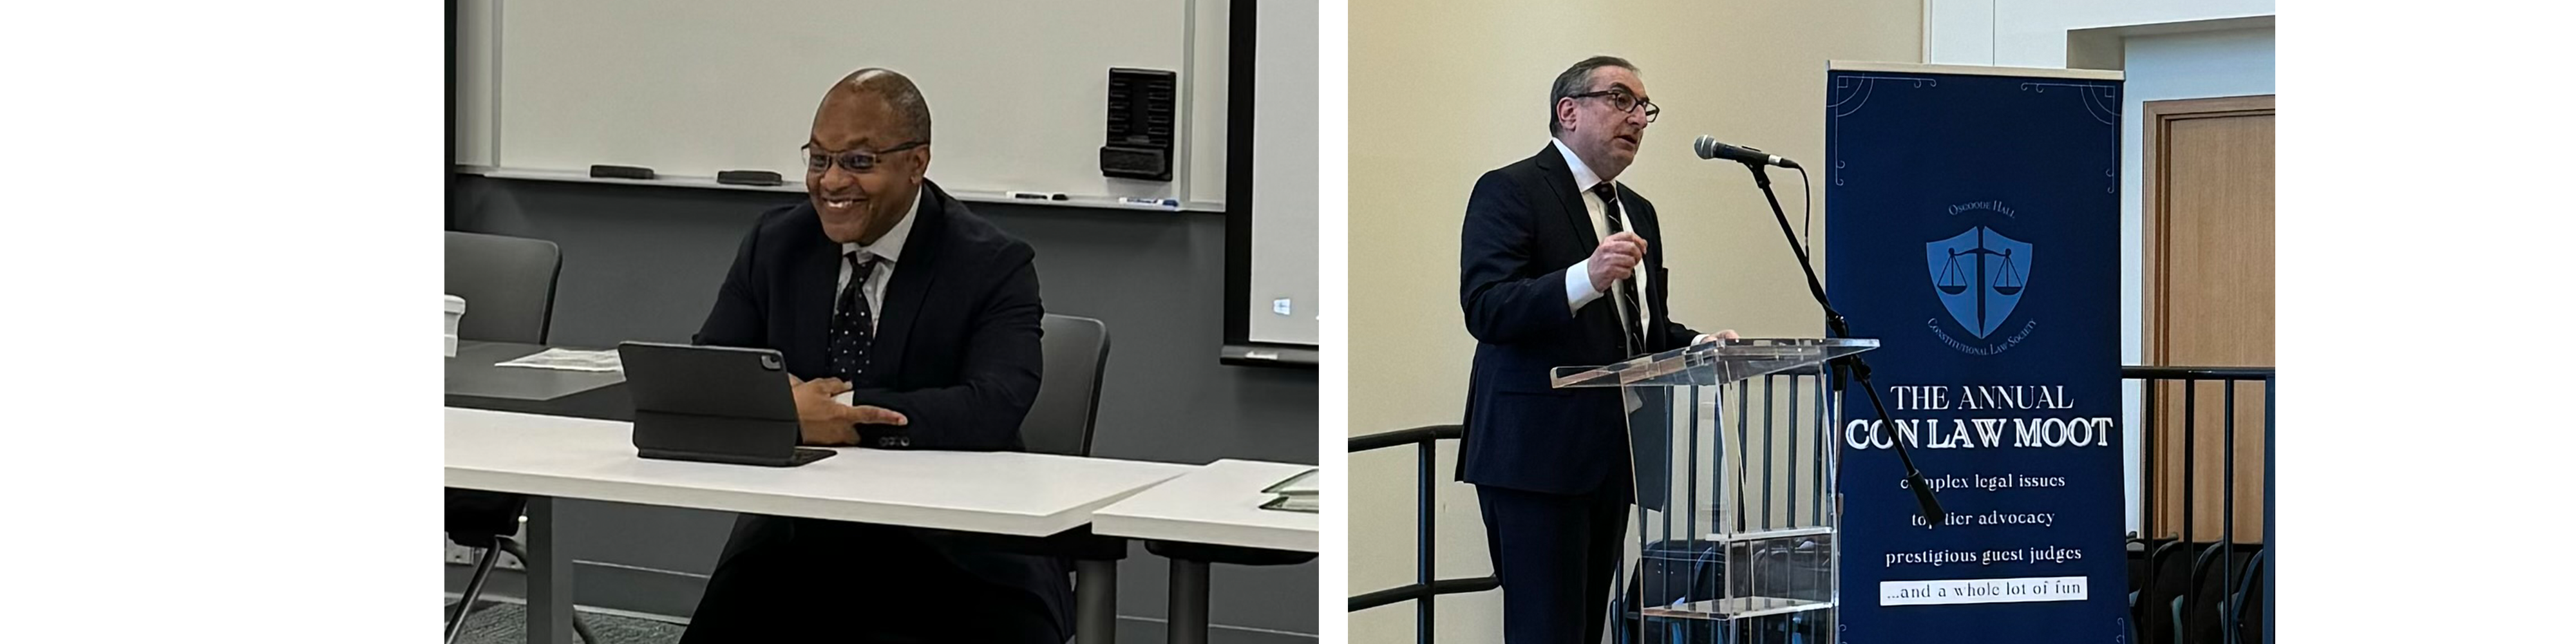 Chief Justice Tulloch sitting at a table addressing an audience. Second photo of Justice Sossin on stage addressing audience.